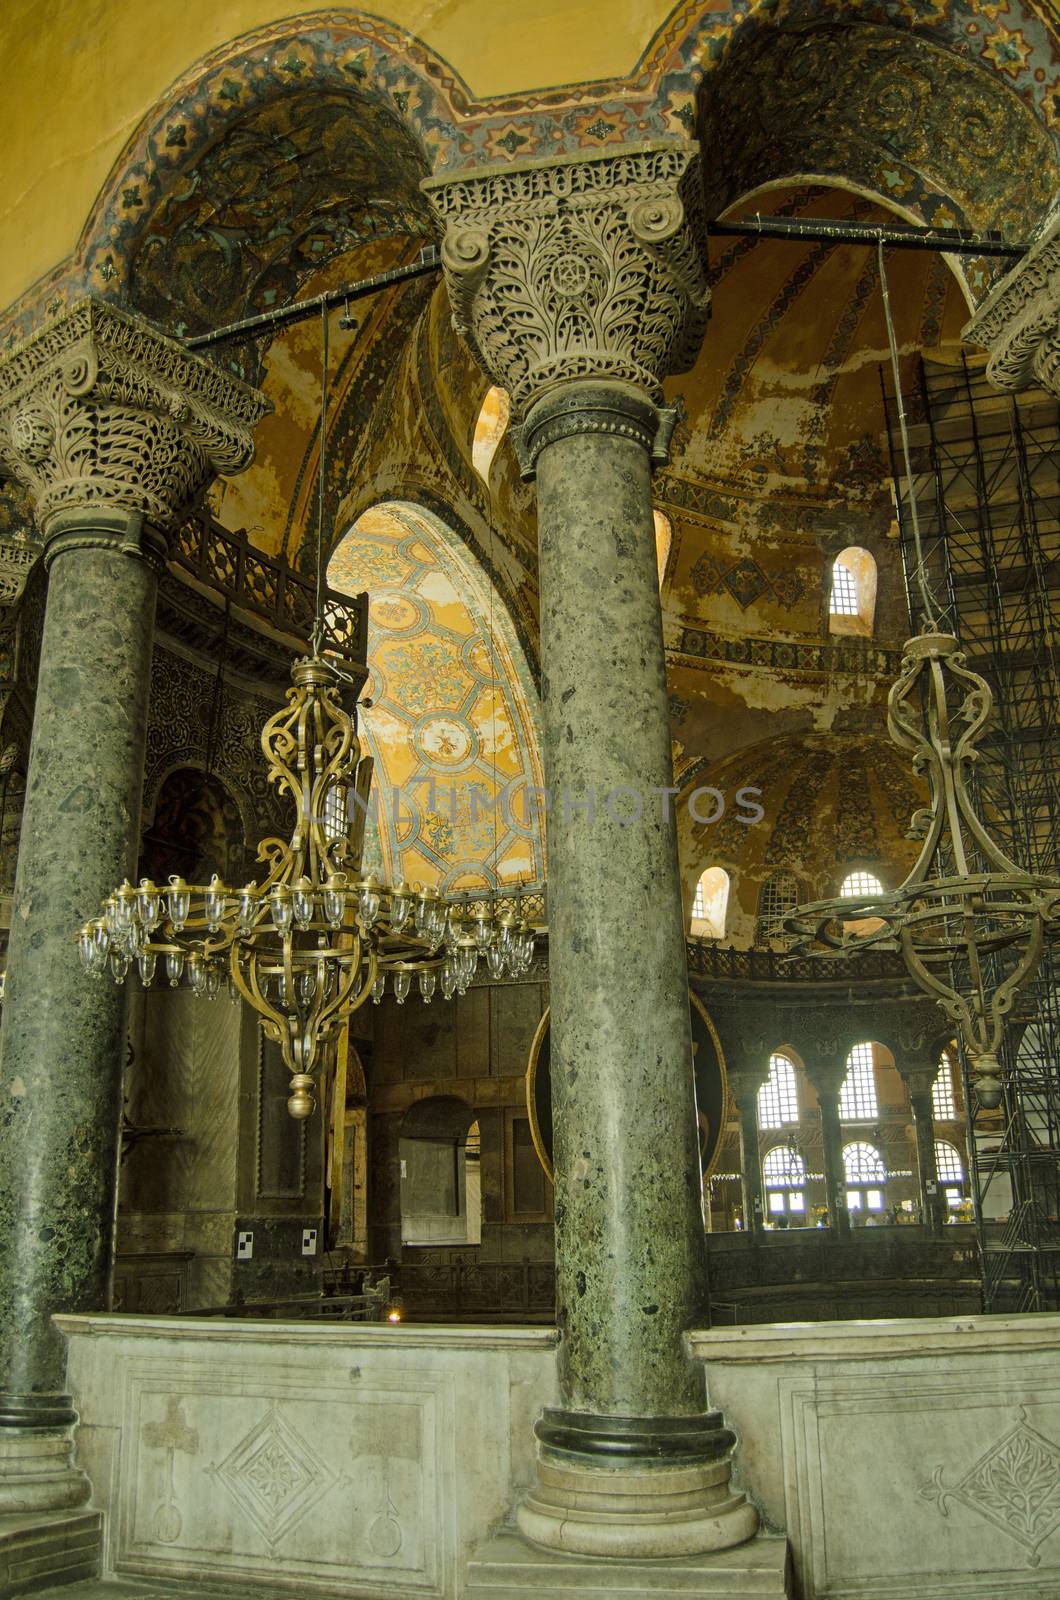 View across some of the vast, empty space of the Hagia Sophia.  Looking across the gallery on the first floor of this Byzantine historic monument in Istanbul.